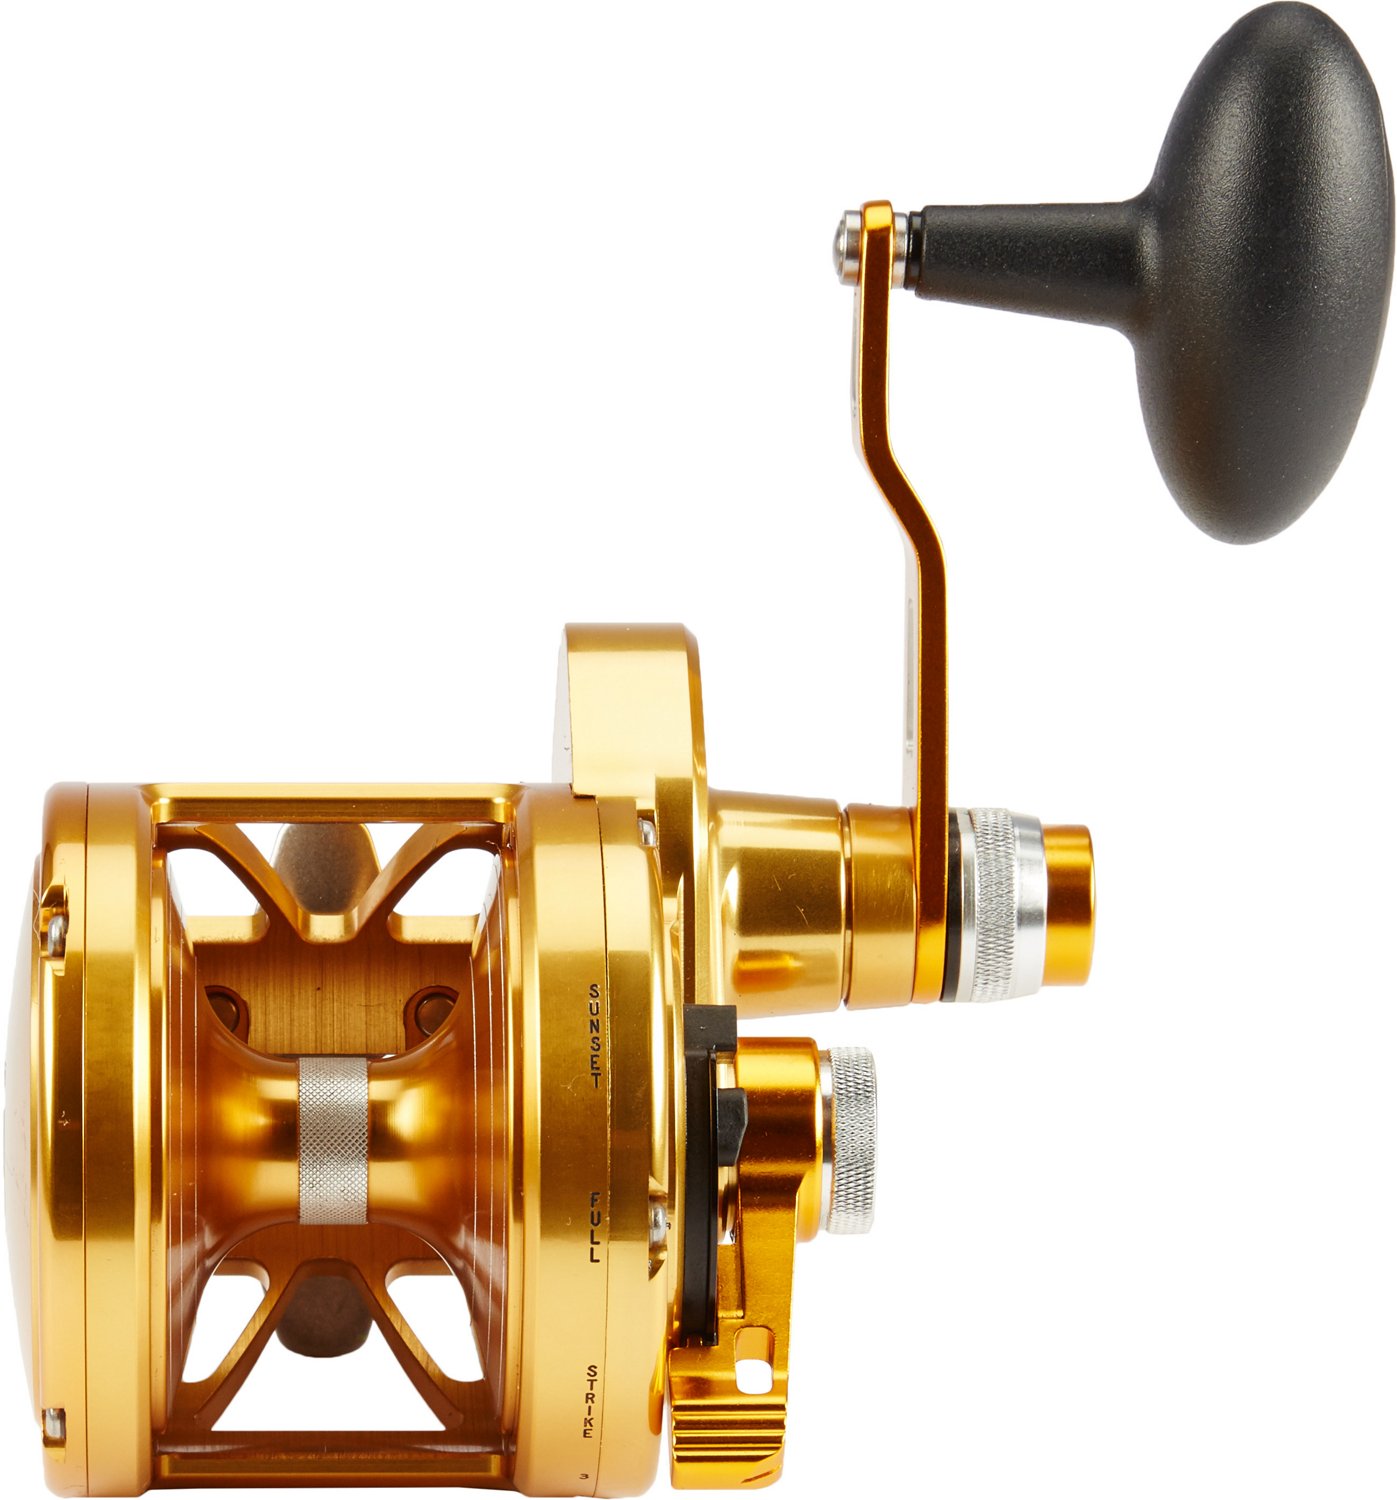 Academy Sports + Outdoors PENN Torque Lever Drag 2-Speed Conventional Reel